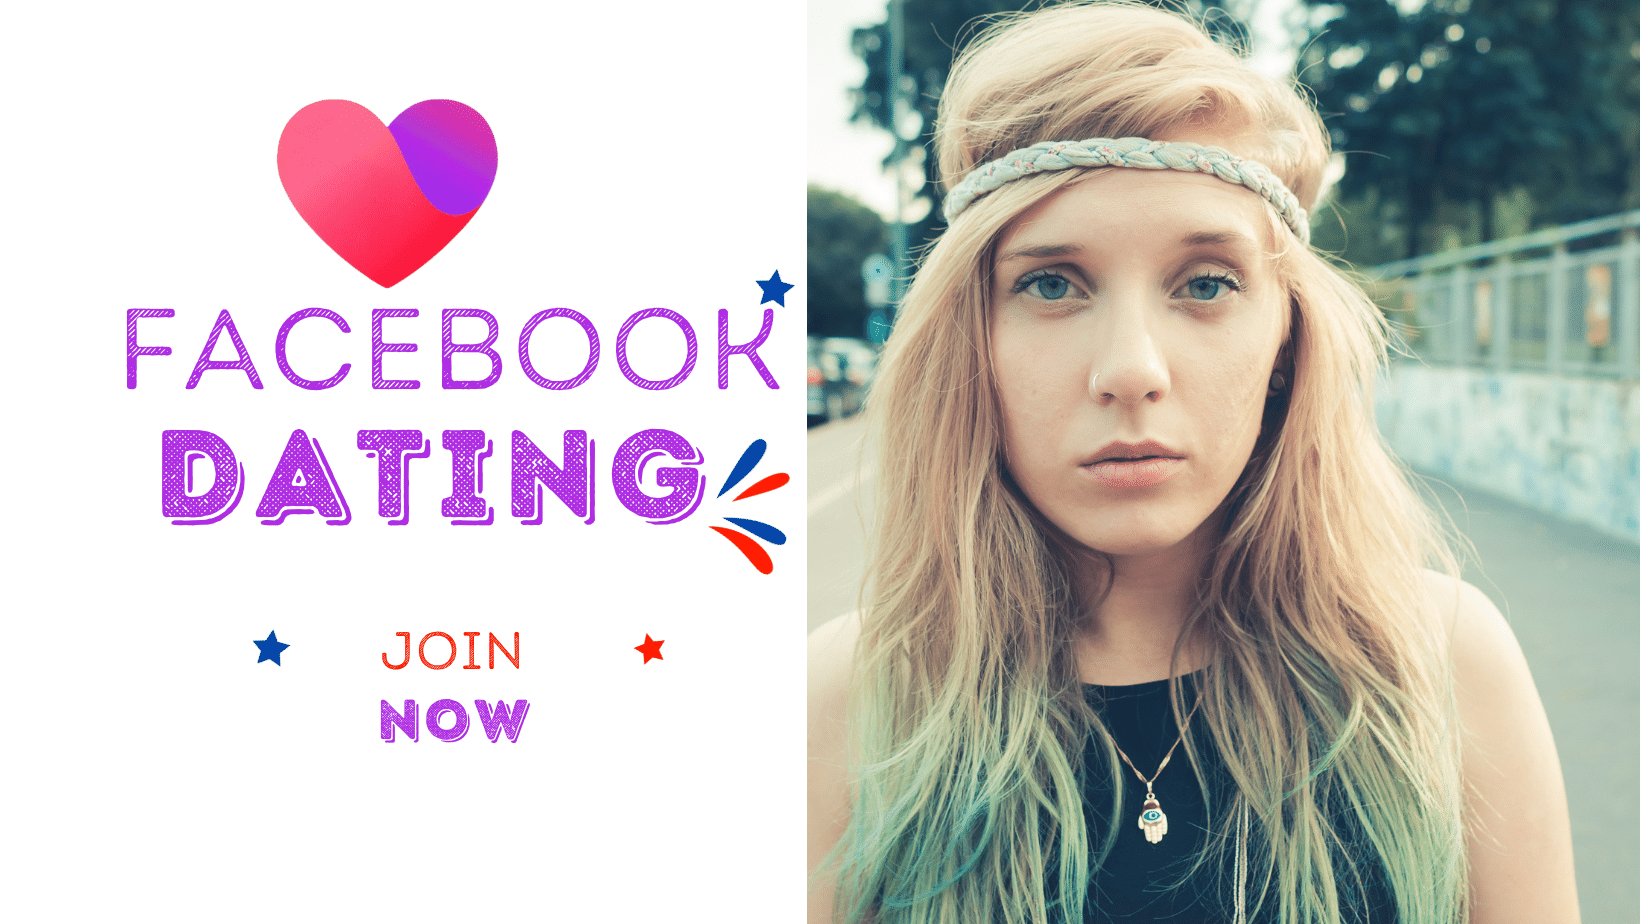 Facebook dating is now available